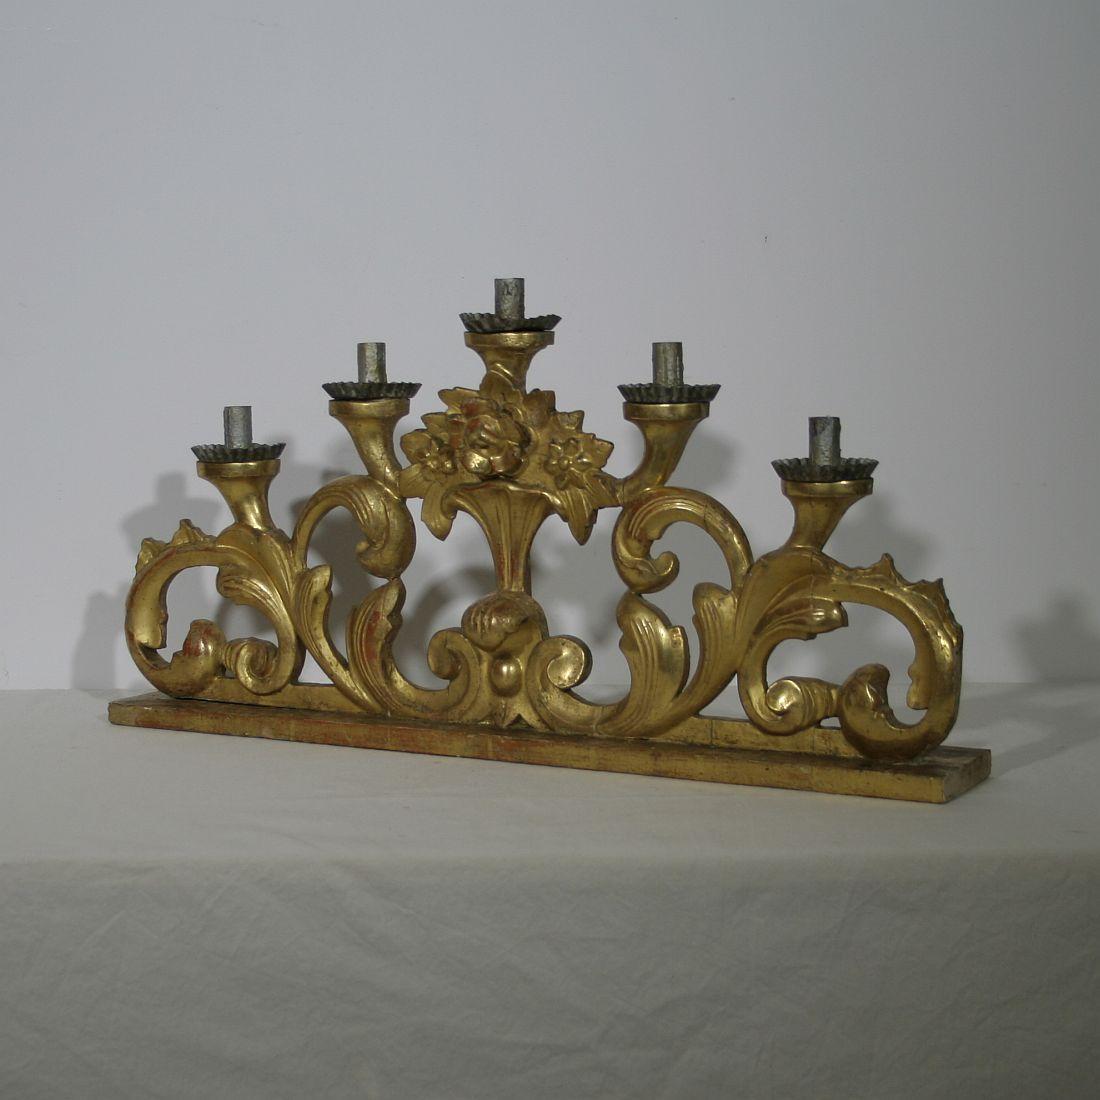 Late 18th Century Italian Carved Giltwood Baroque Candleholder (Italienisch)